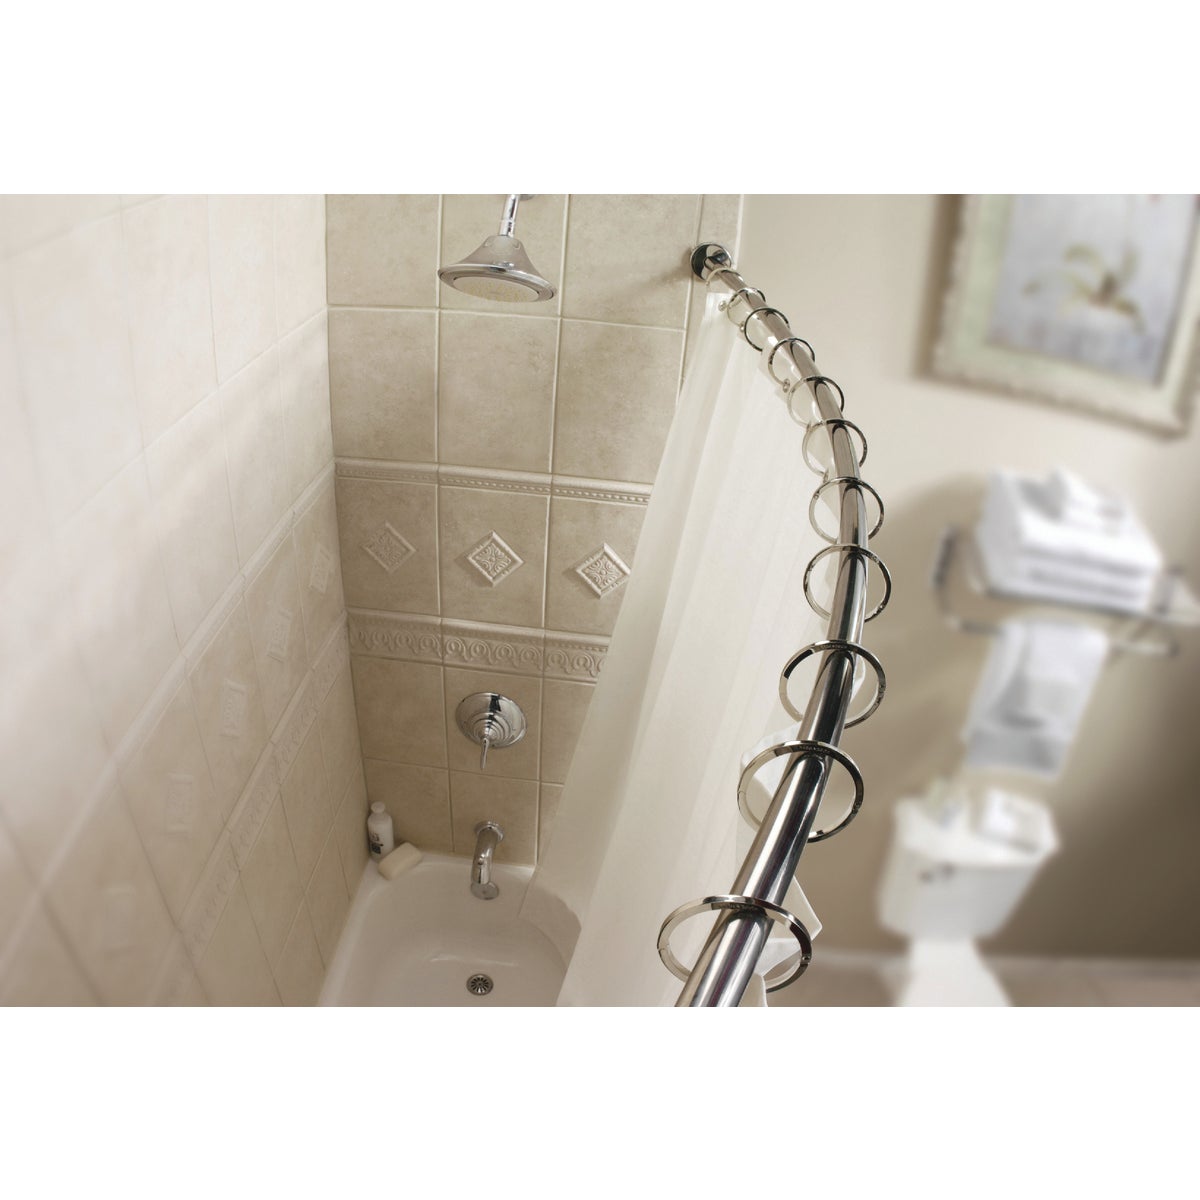 Item 448475, Provides easy installation and works with standard shower curtains.